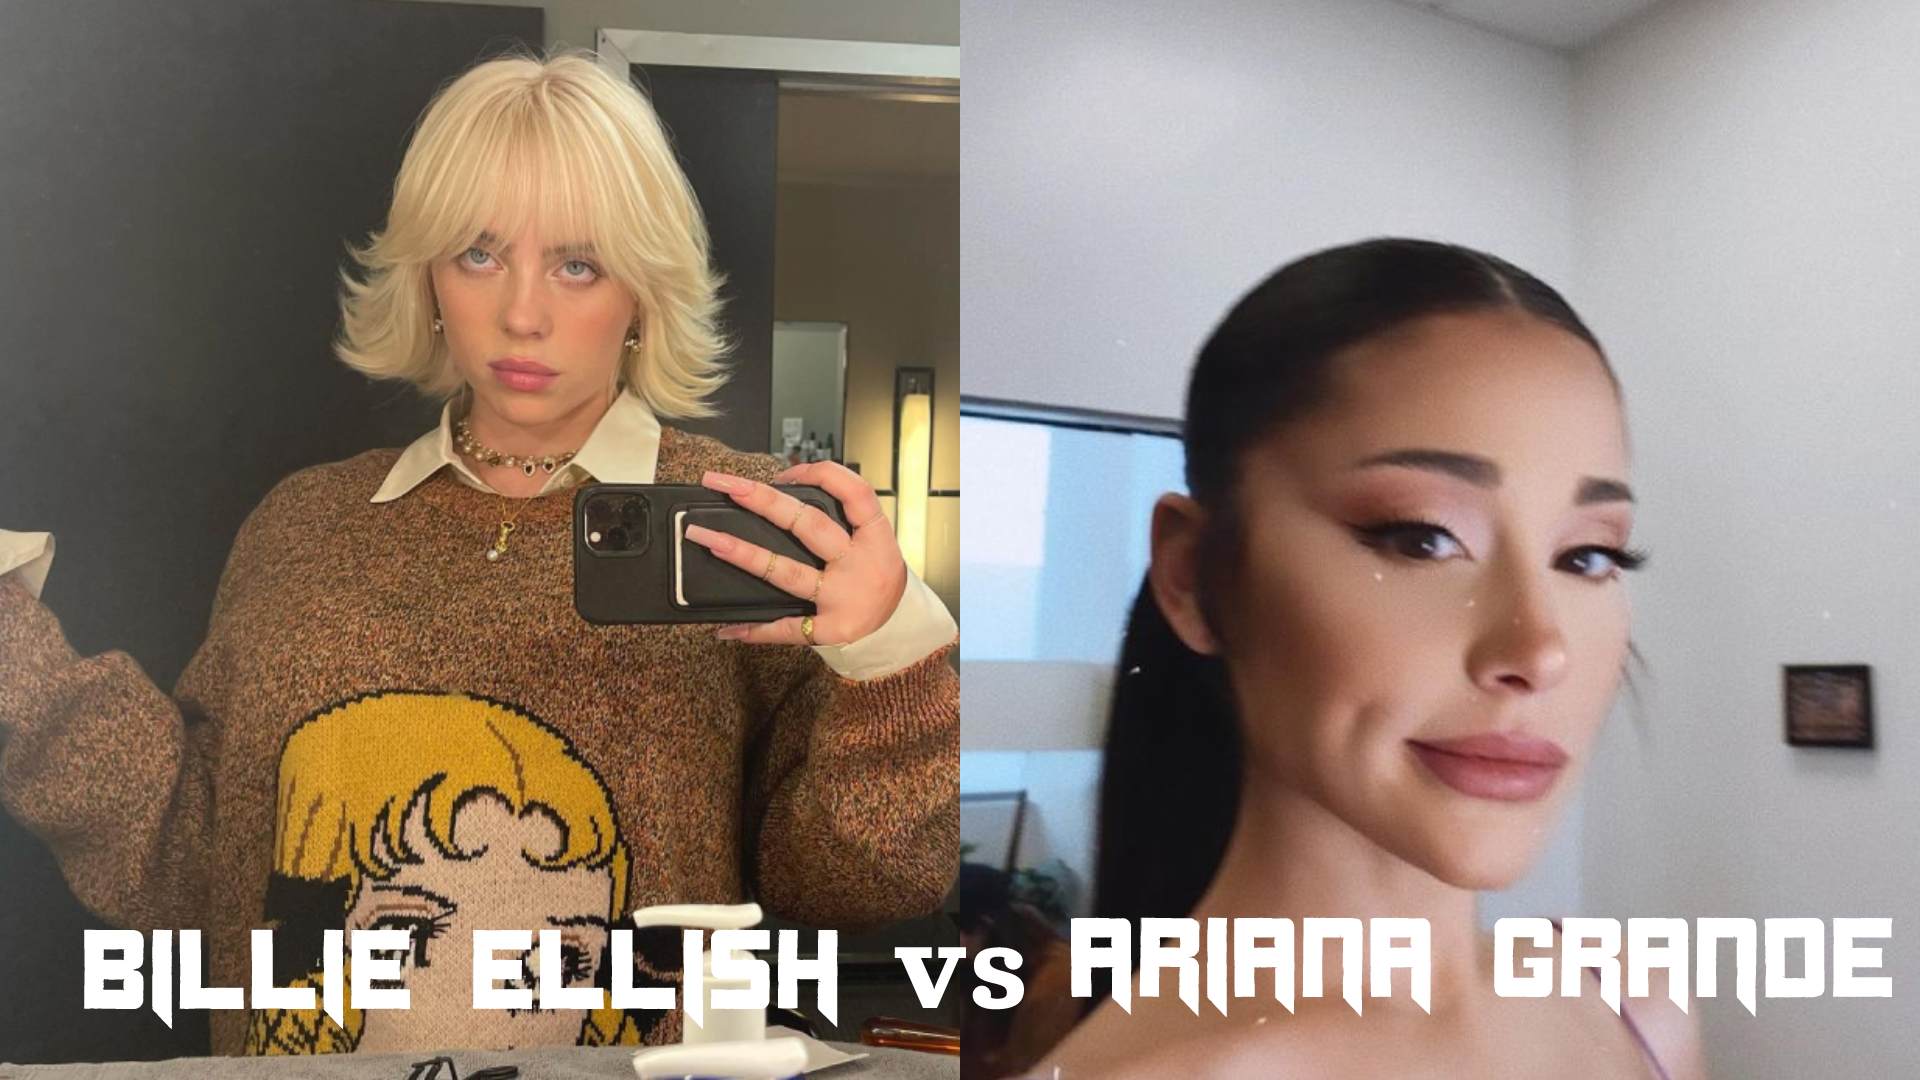 Billie Eilish vs Ariana Grande Who is more famous